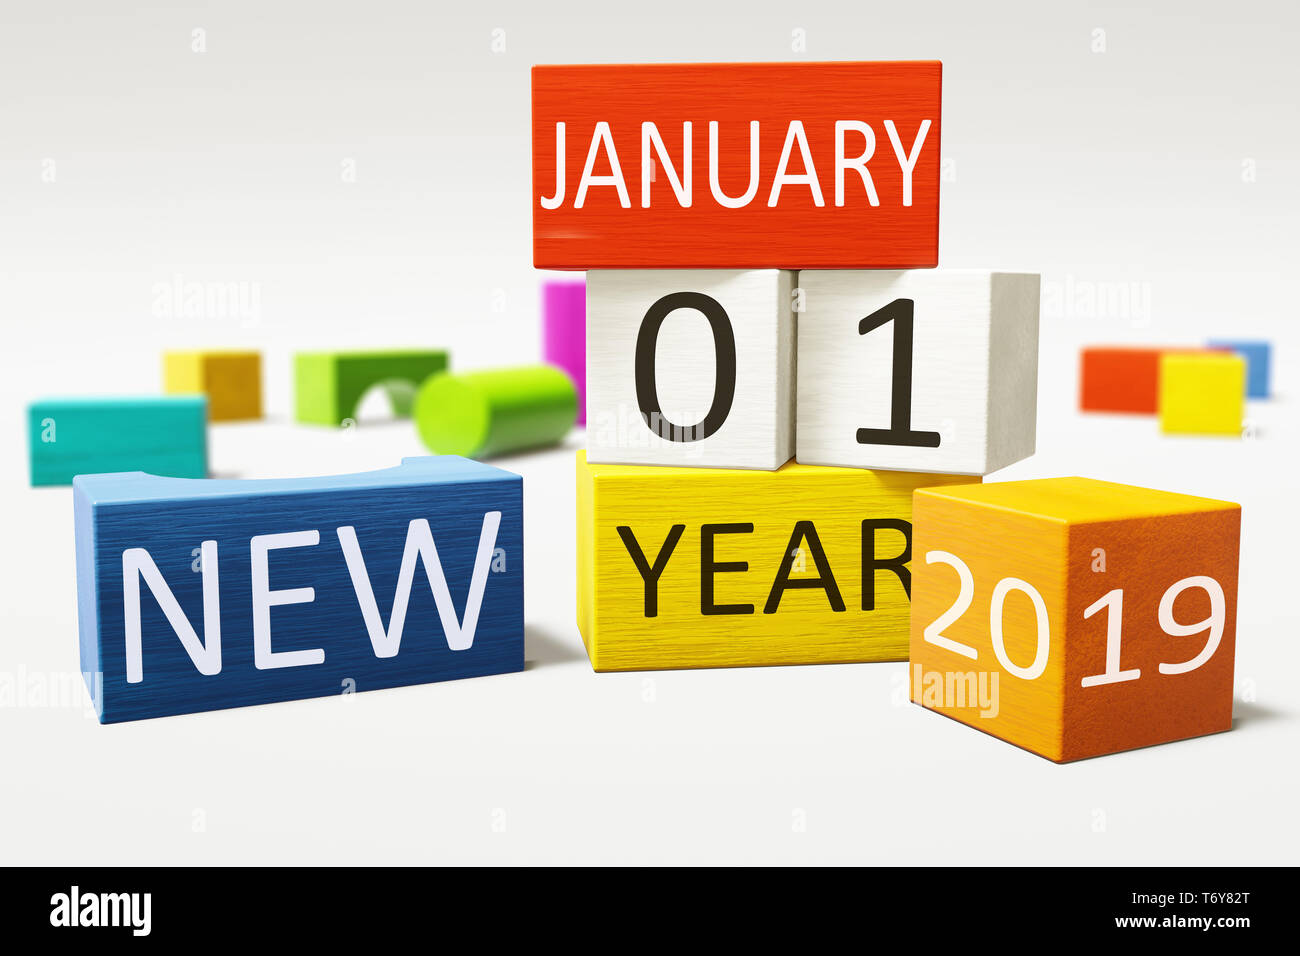 new year january thirst 2019 colorful building blocks Stock Photo